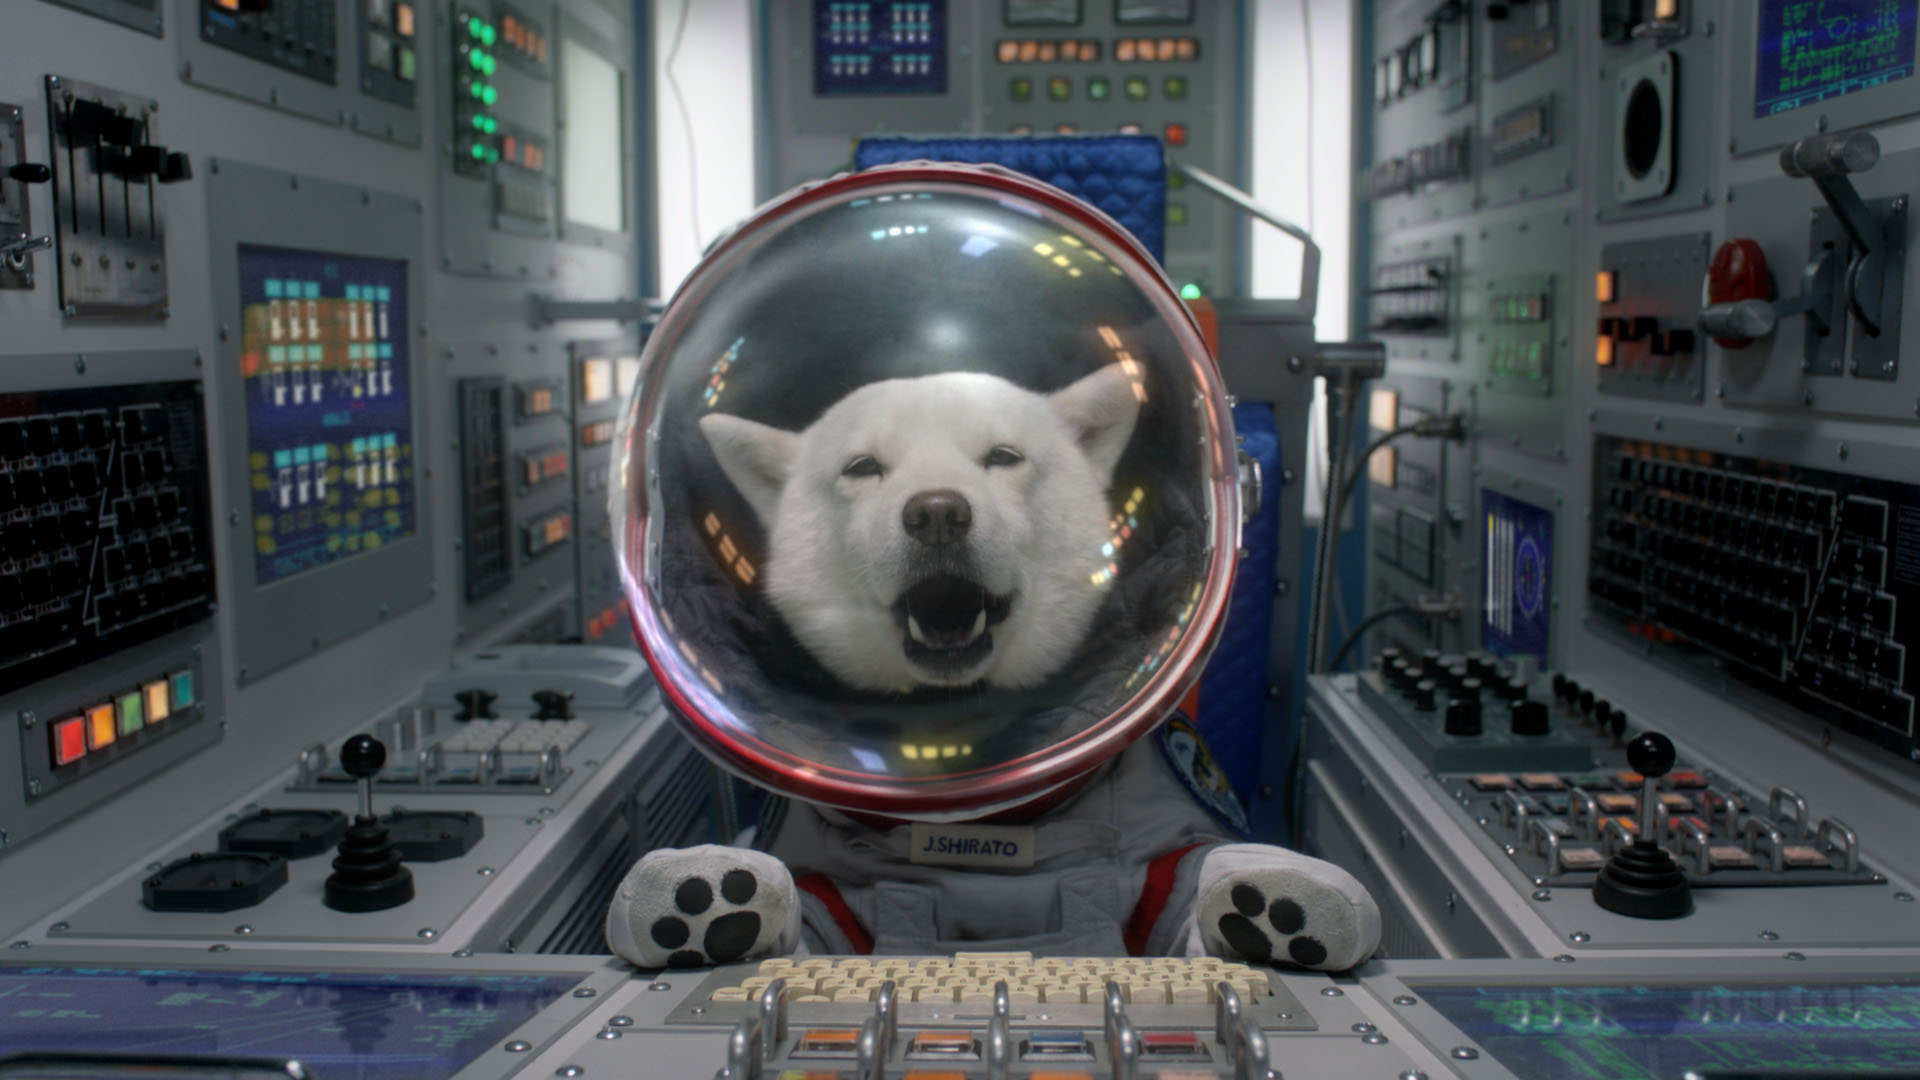 Space rover: 'In space there is hope,' says Otosan before blasting off in this two-minute ad made for last Christmas. | KAZUAKI NAGATA/SATOKO KAWASAKI/EDAN CORKILL